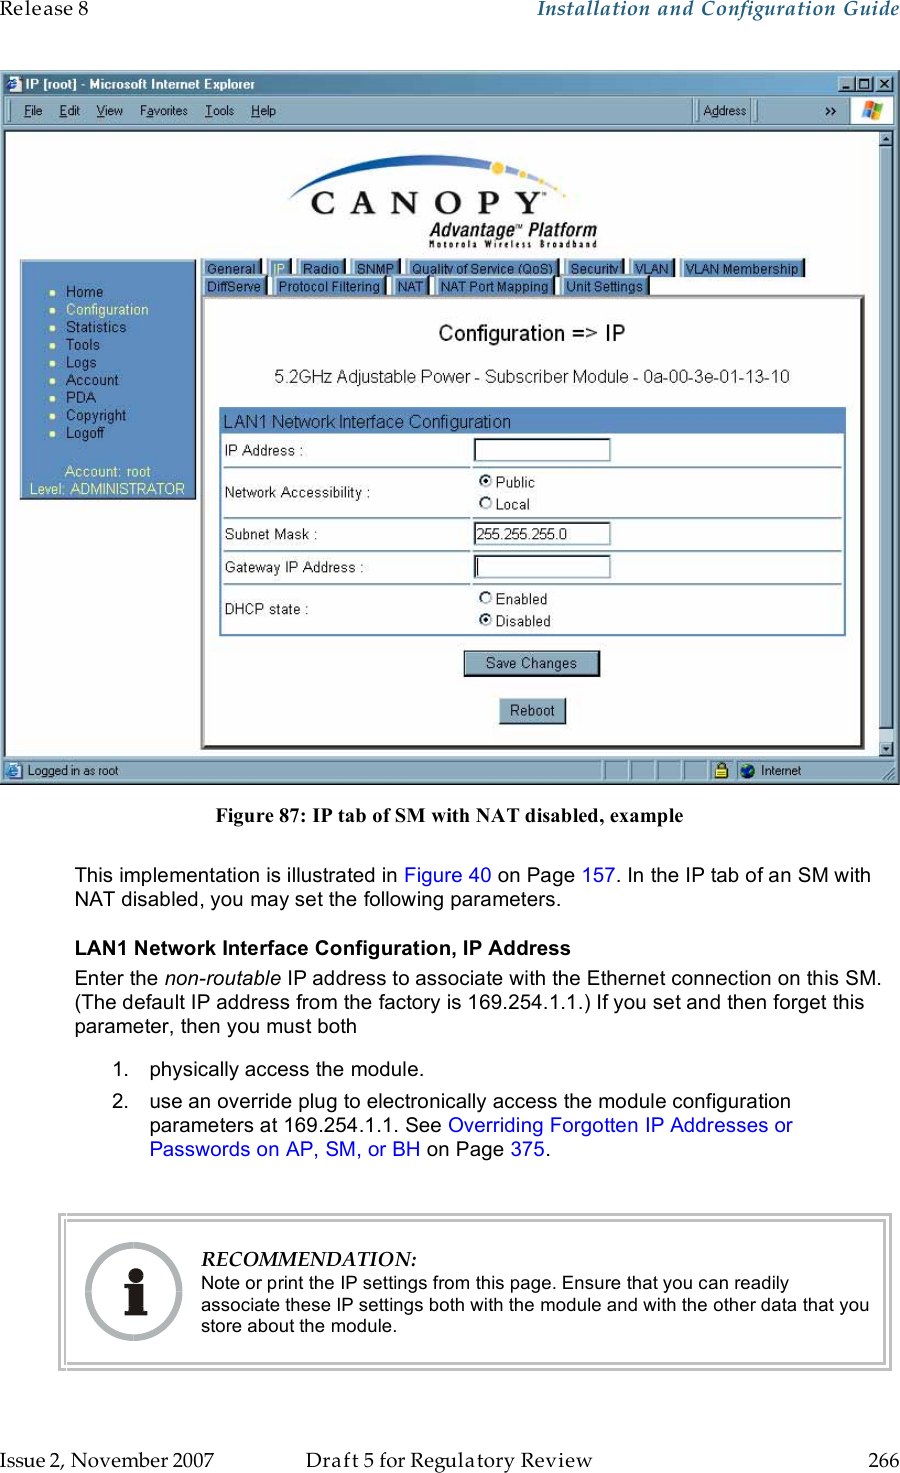 Release 8    Installation and Configuration Guide   Issue 2, November 2007  Draft 5 for Regulatory Review  266      Figure 87: IP tab of SM with NAT disabled, example  This implementation is illustrated in Figure 40 on Page 157. In the IP tab of an SM with NAT disabled, you may set the following parameters. LAN1 Network Interface Configuration, IP Address Enter the non-routable IP address to associate with the Ethernet connection on this SM. (The default IP address from the factory is 169.254.1.1.) If you set and then forget this parameter, then you must both 1.  physically access the module. 2.  use an override plug to electronically access the module configuration parameters at 169.254.1.1. See Overriding Forgotten IP Addresses or Passwords on AP, SM, or BH on Page 375.   RECOMMENDATION: Note or print the IP settings from this page. Ensure that you can readily associate these IP settings both with the module and with the other data that you store about the module. 